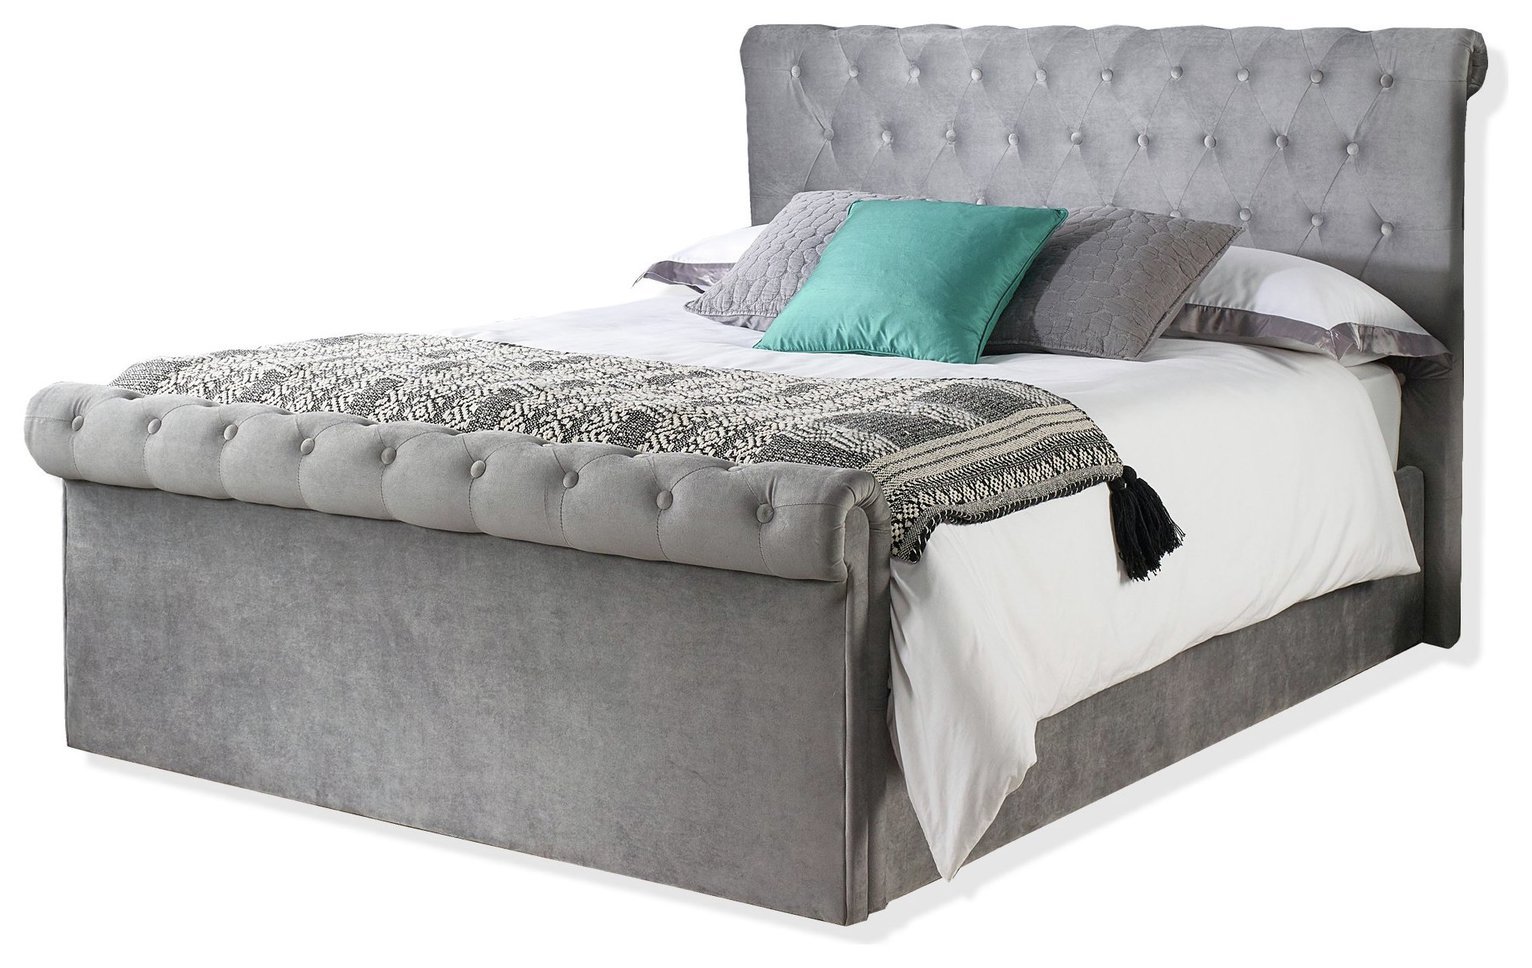 Aspire Chesterfield Small Double Ottoman Bed Frame - Grey